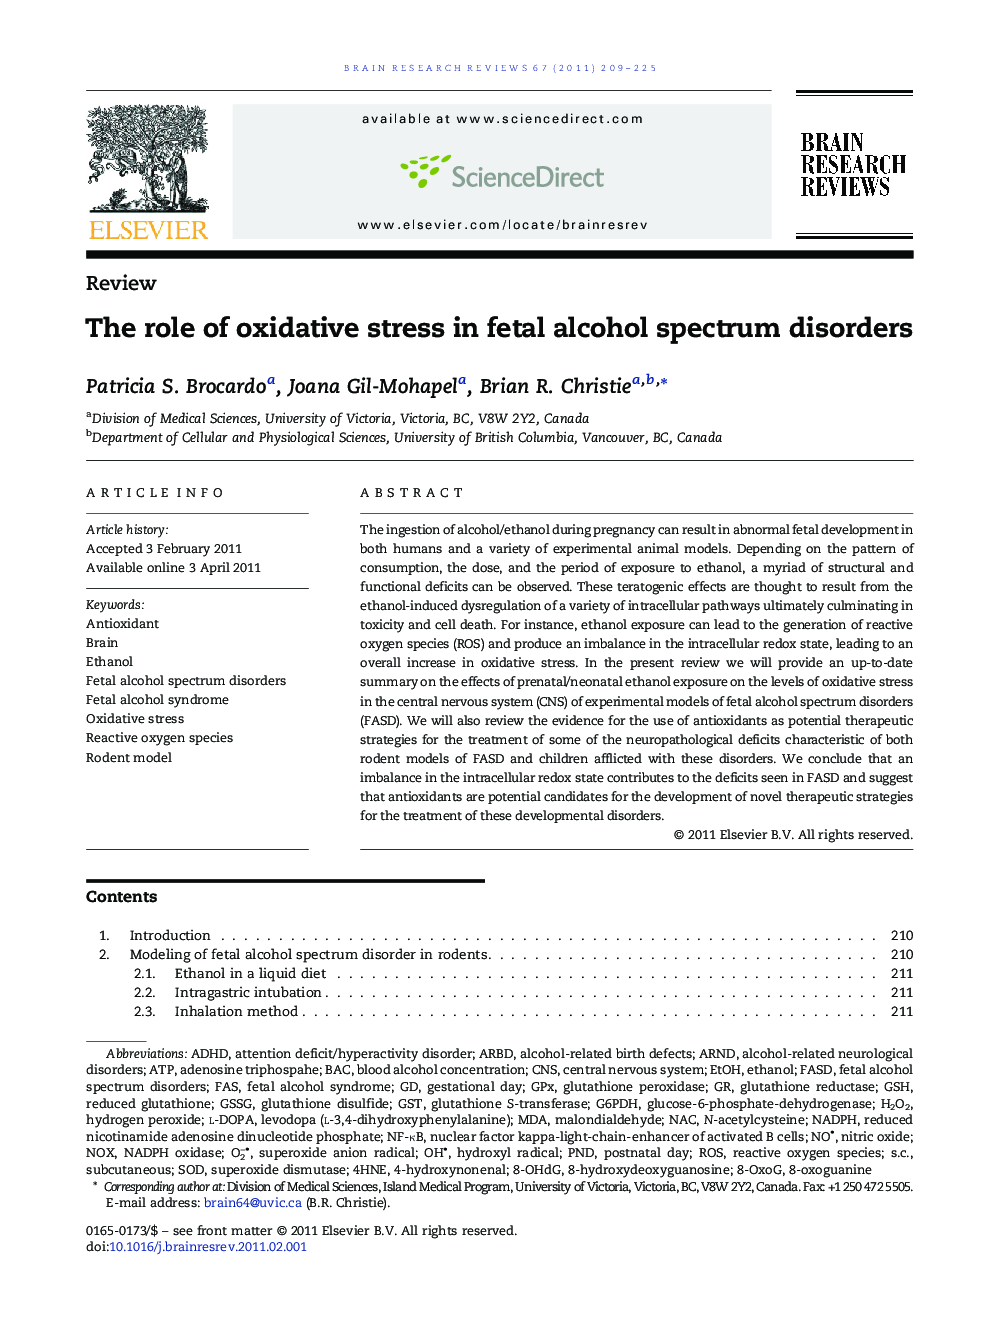 ReviewThe role of oxidative stress in fetal alcohol spectrum disorders